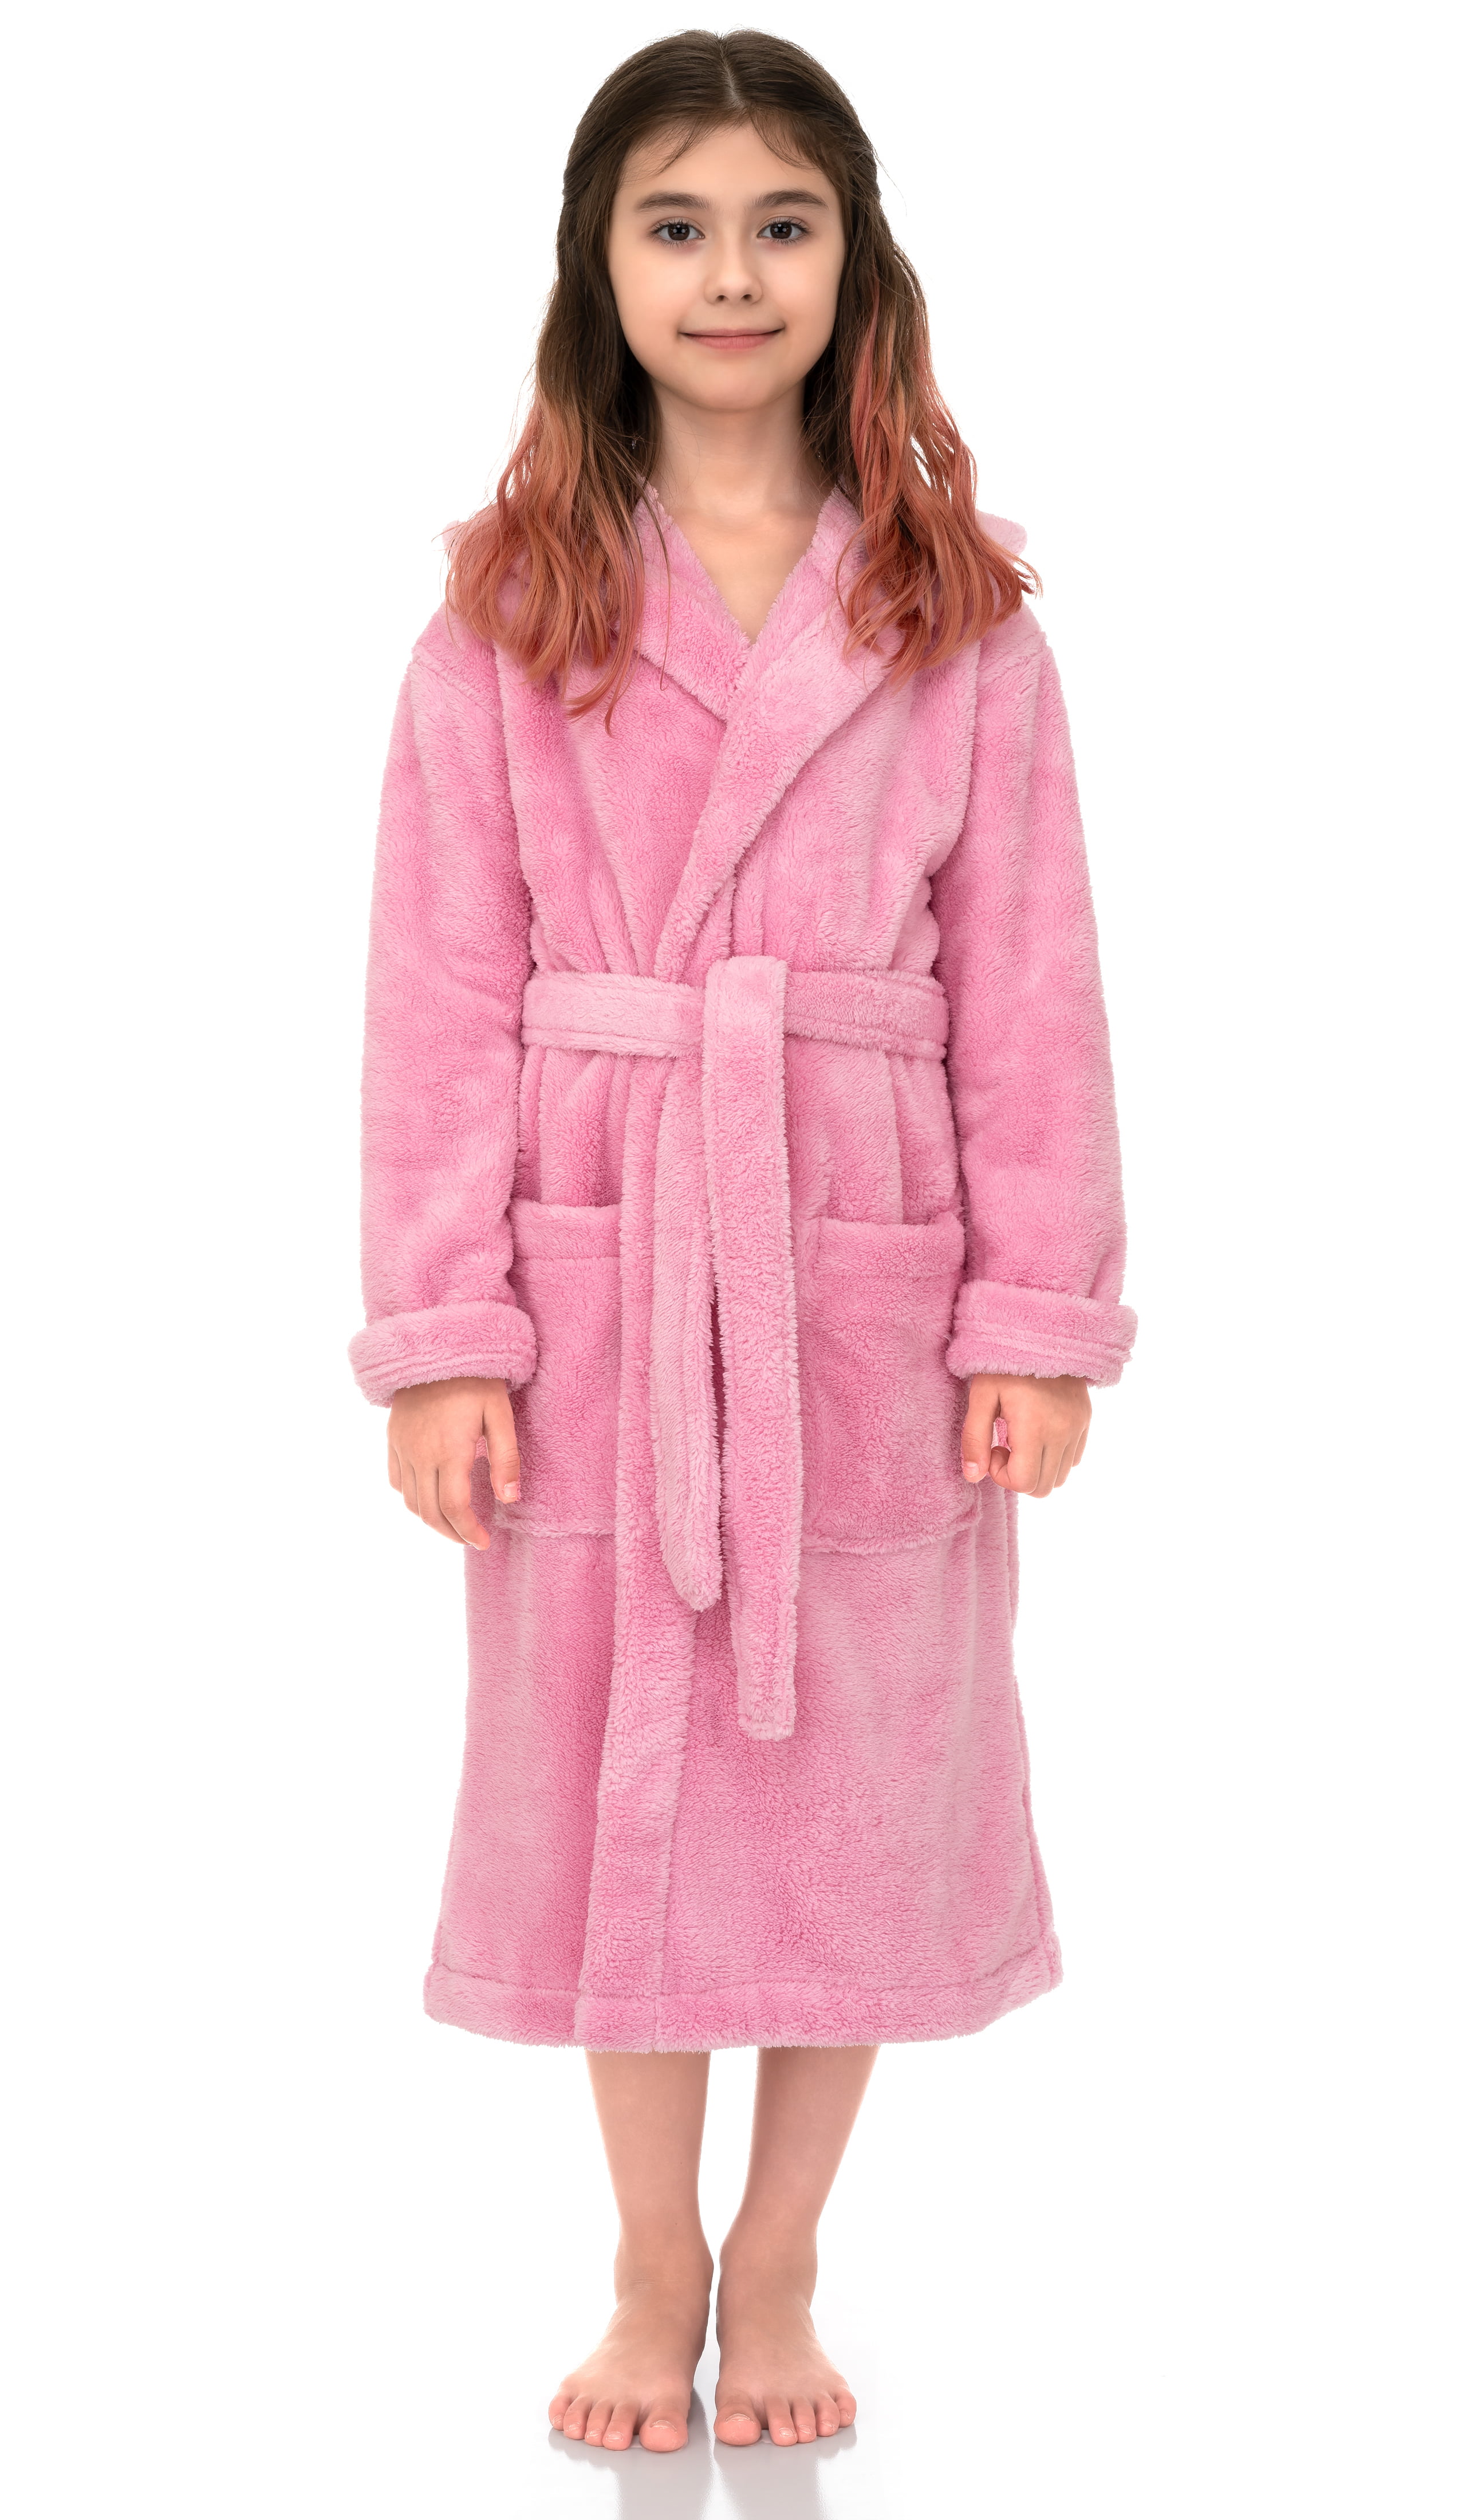 Kids Pink Bathrobe Girls Embroidered Emma Soft Dressing Gown | Girl's Size  Small | eBay